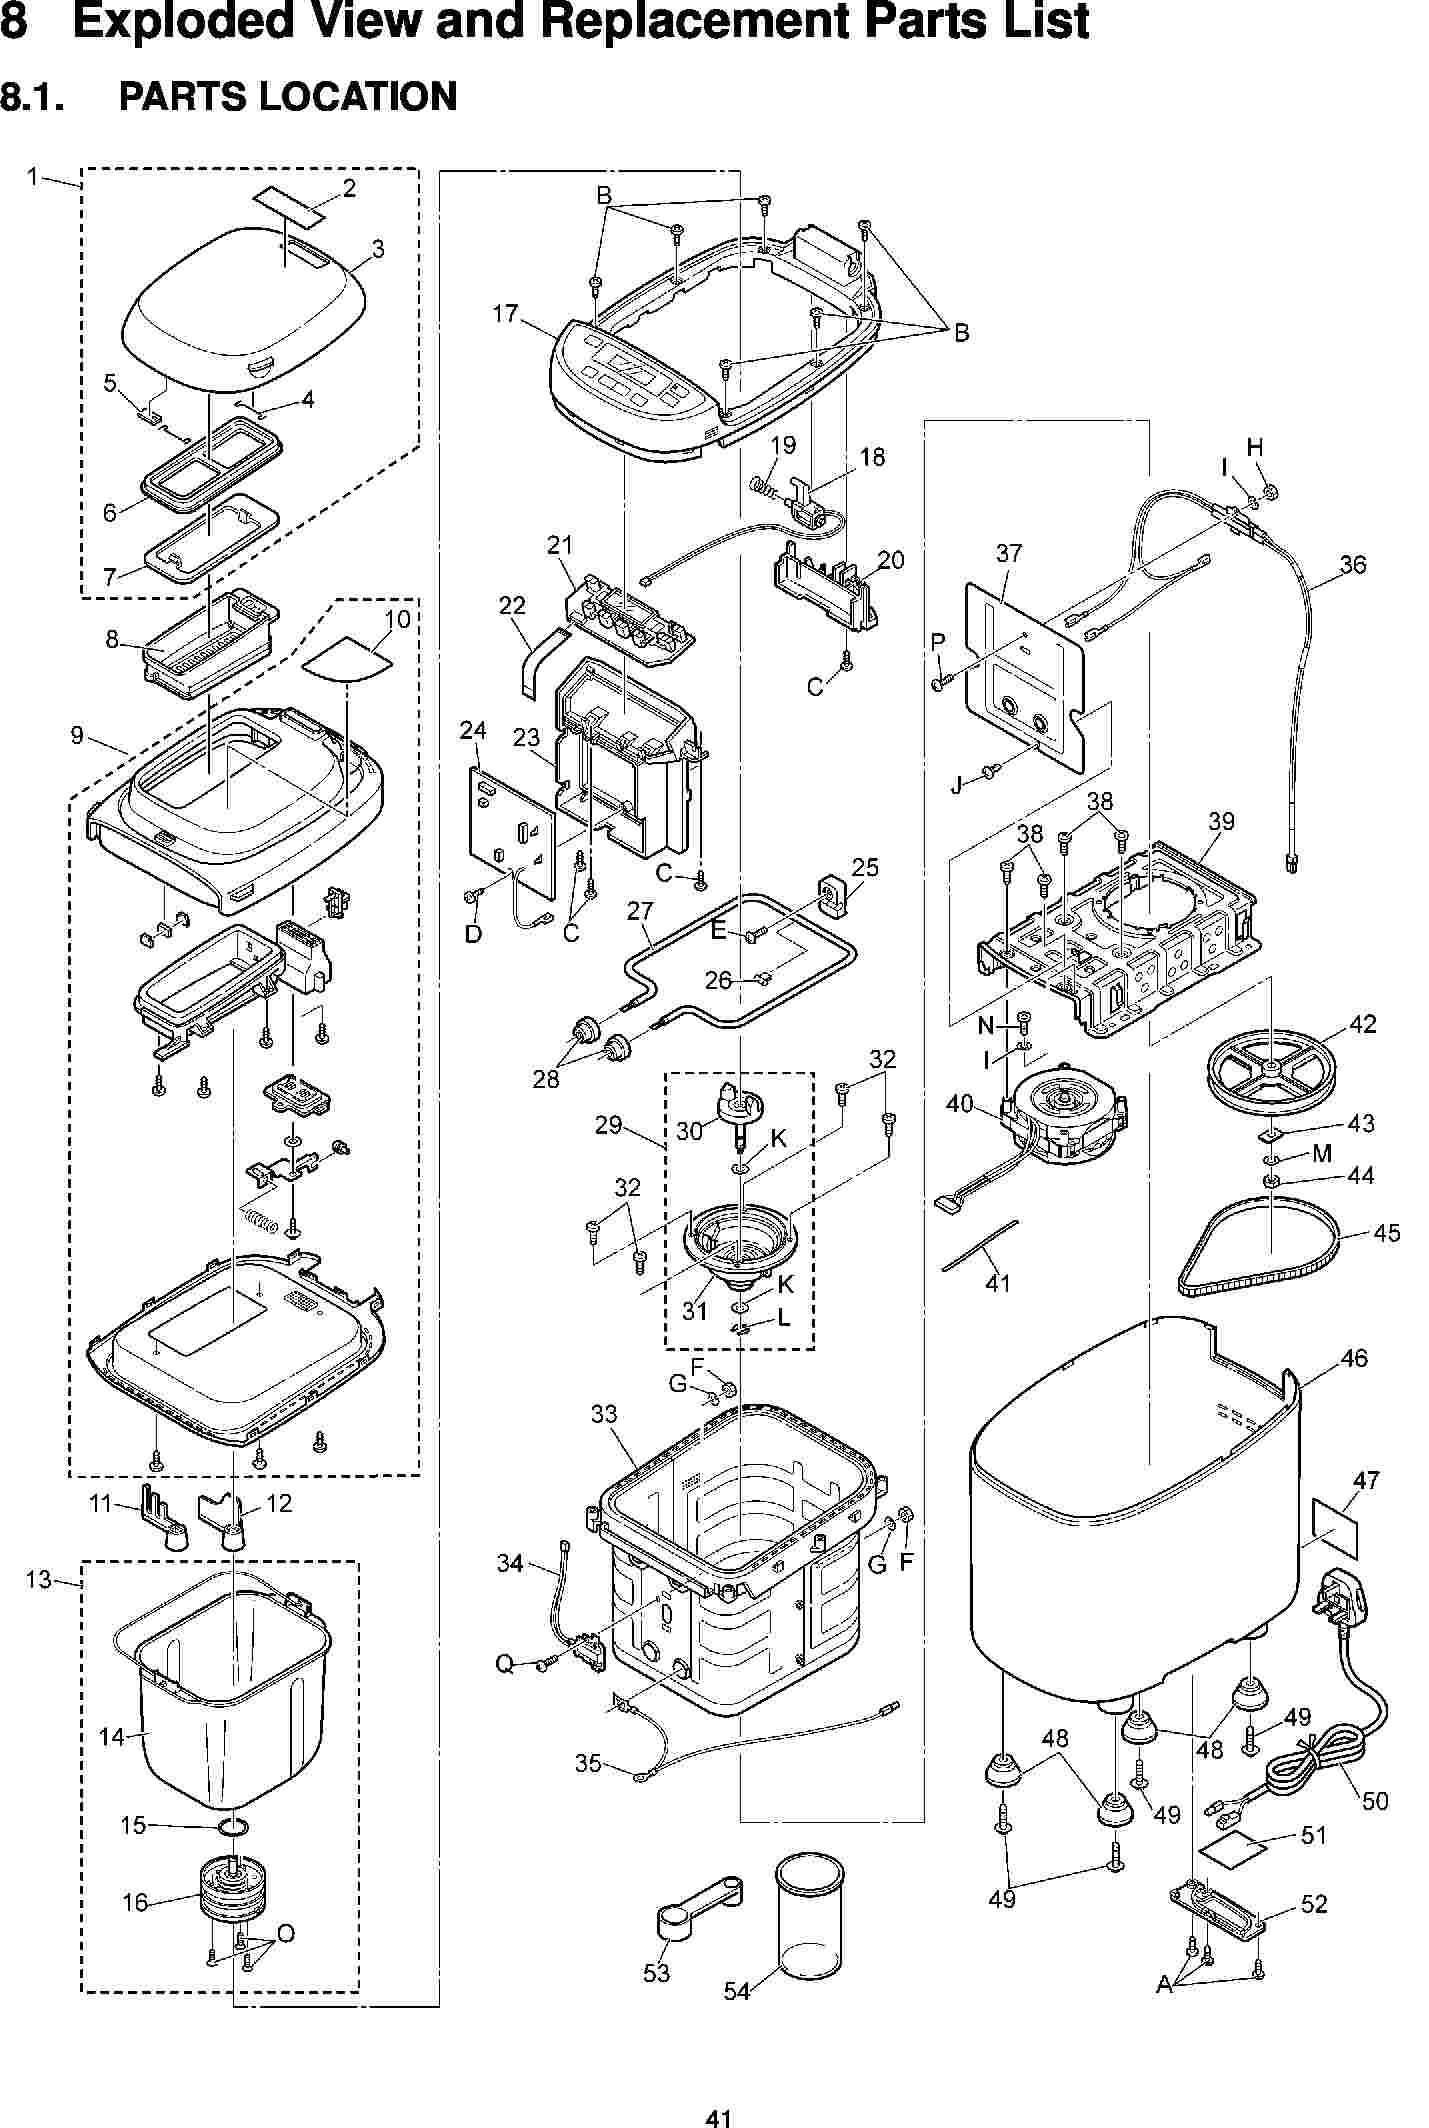 SD-2501: Exploded View